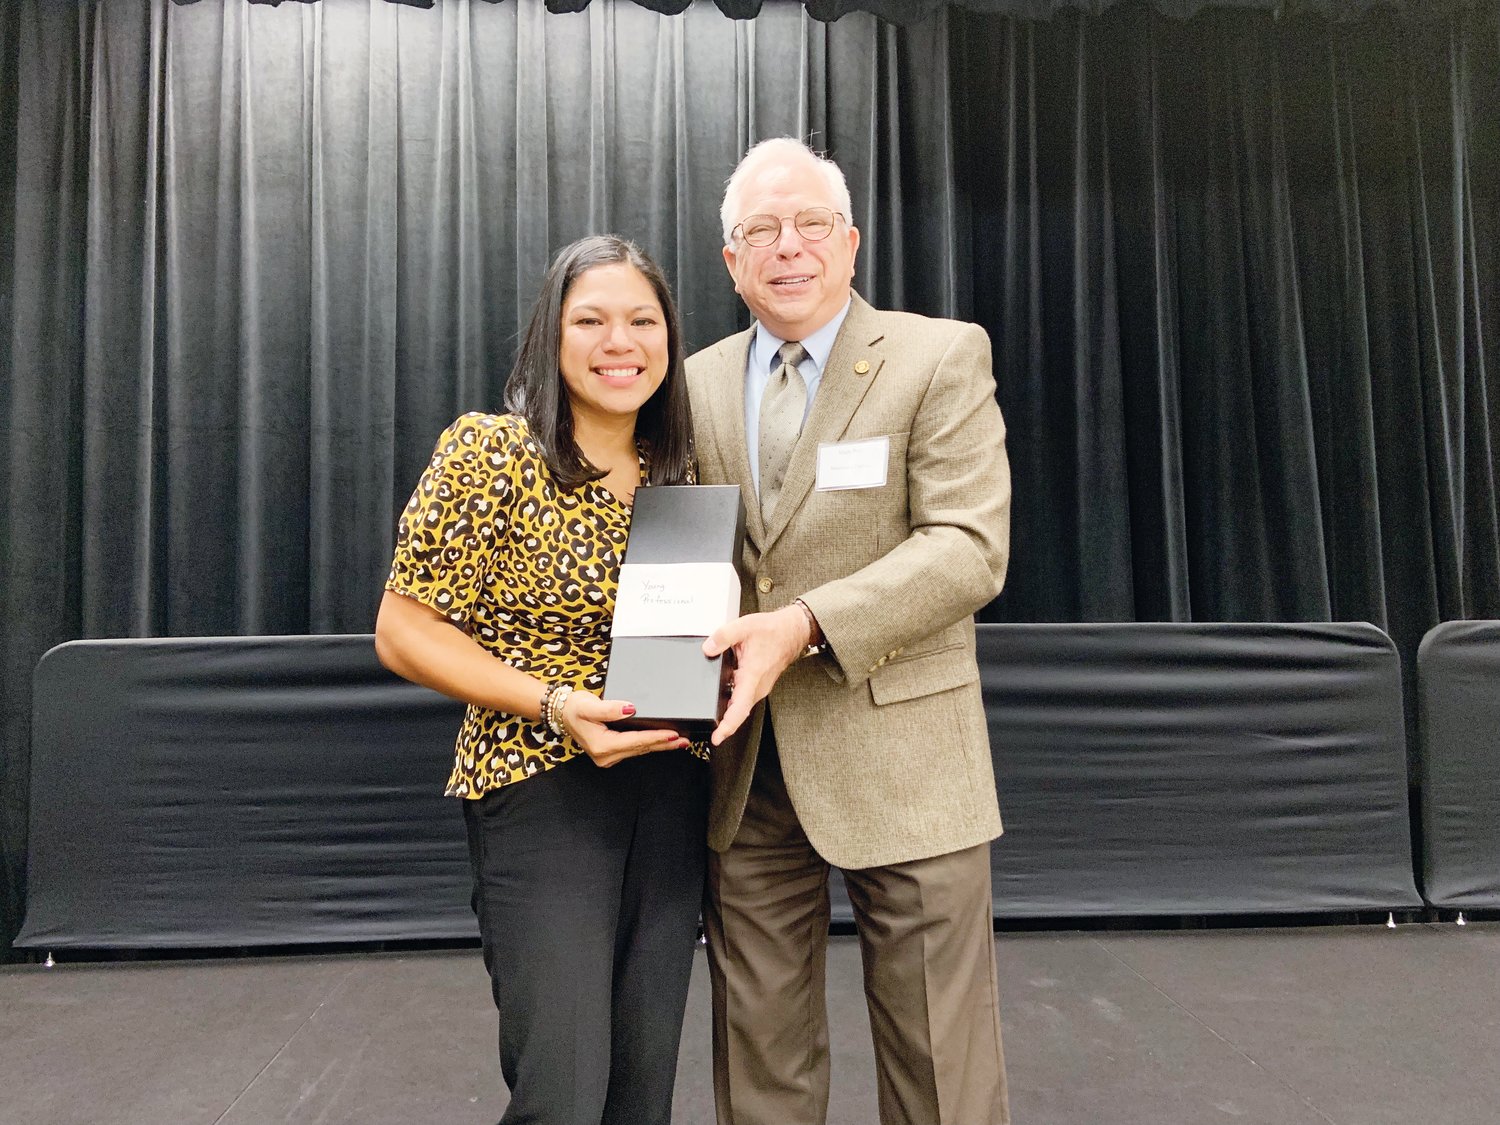 Jennifer Gordiano, left, realtor with Chatham Homes Realty, receives the award for Young Professional of the Year, presented by Mark Reif, North Carolina community relations manager of Mountaire Farms, at the Chatham Chamber of Commerce’s Annual Meeting last week in Pittsboro.